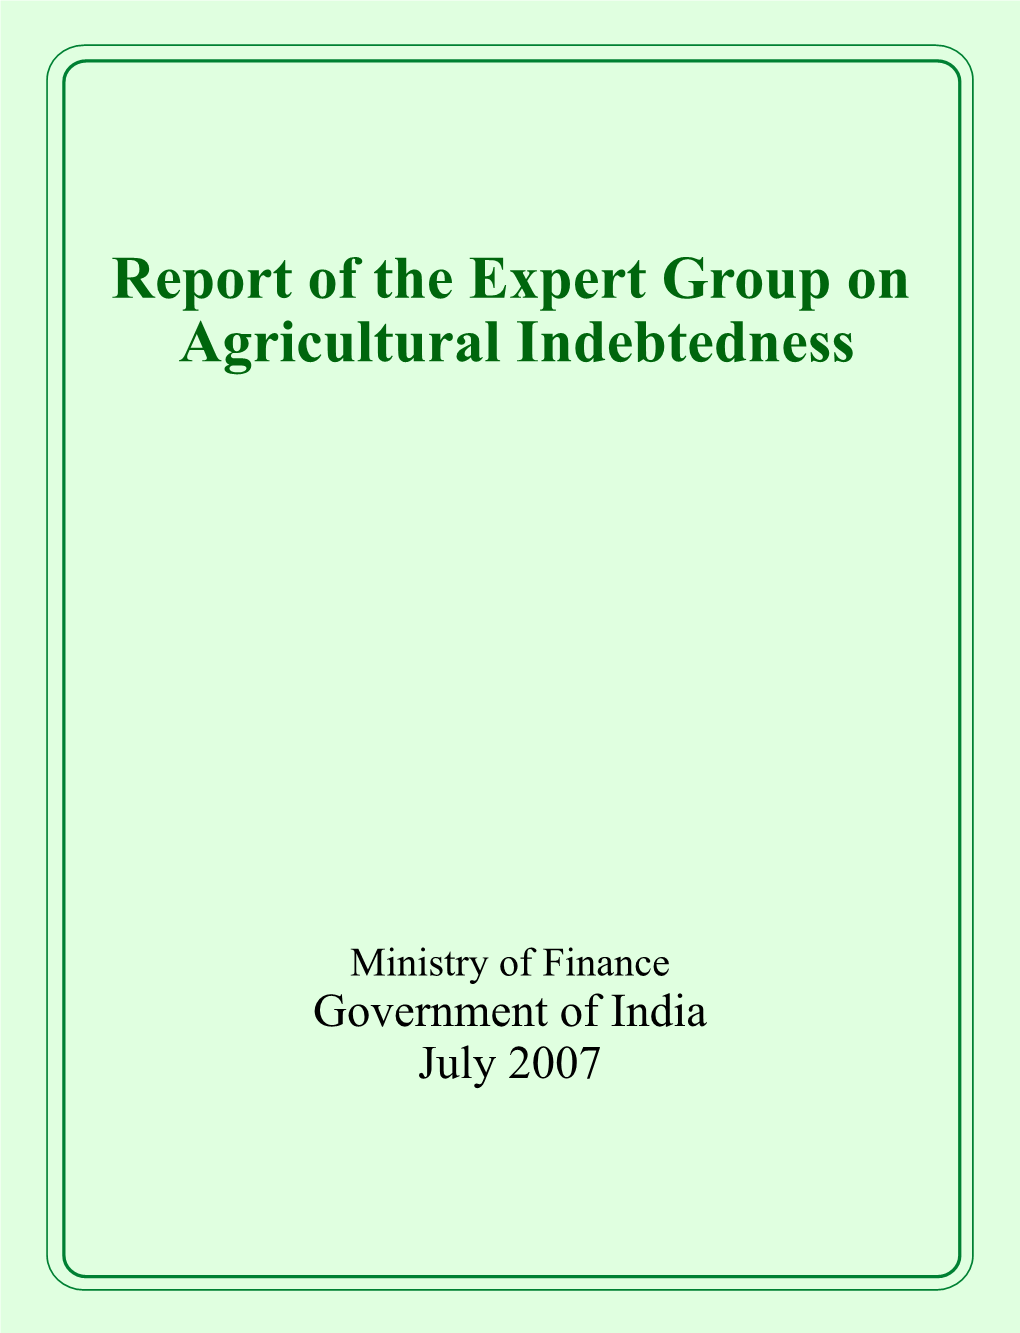 Report of the Expert Group on Agricultural Indebtedness 8 7 5 4